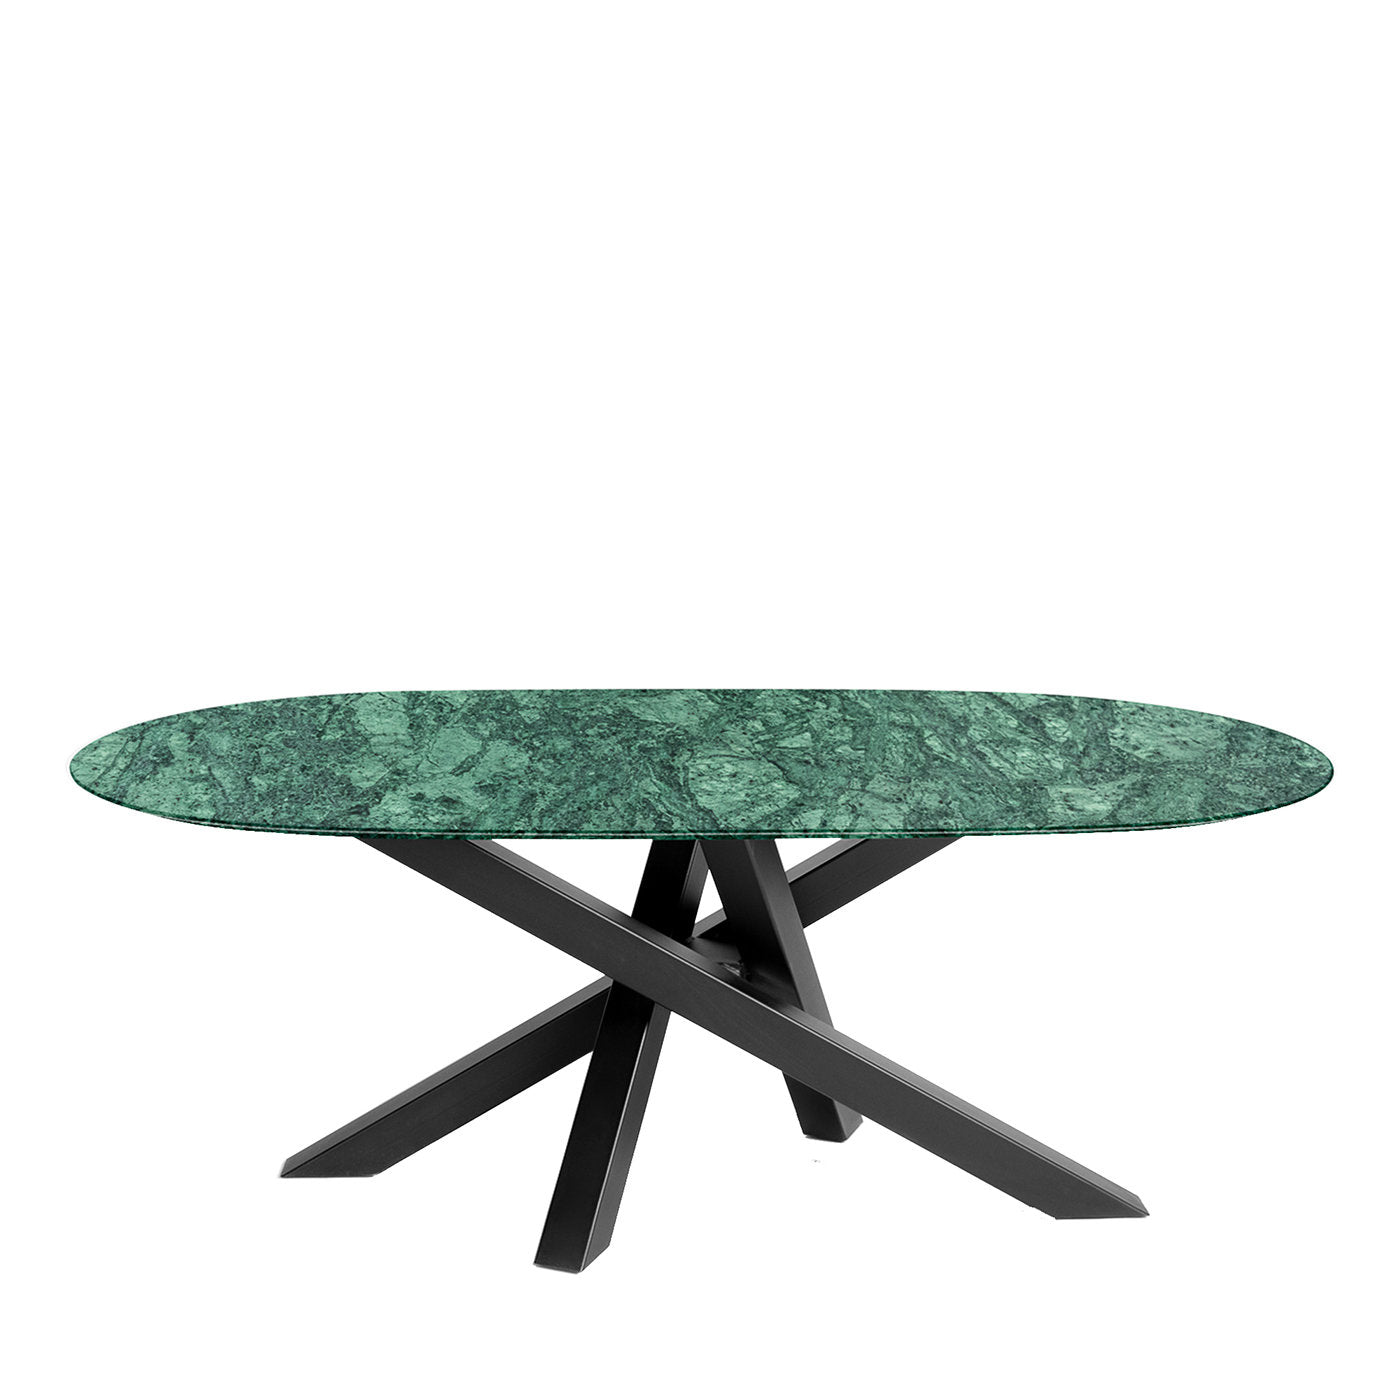 Komodo Green Imperiale Dining Table - Alternative view 1